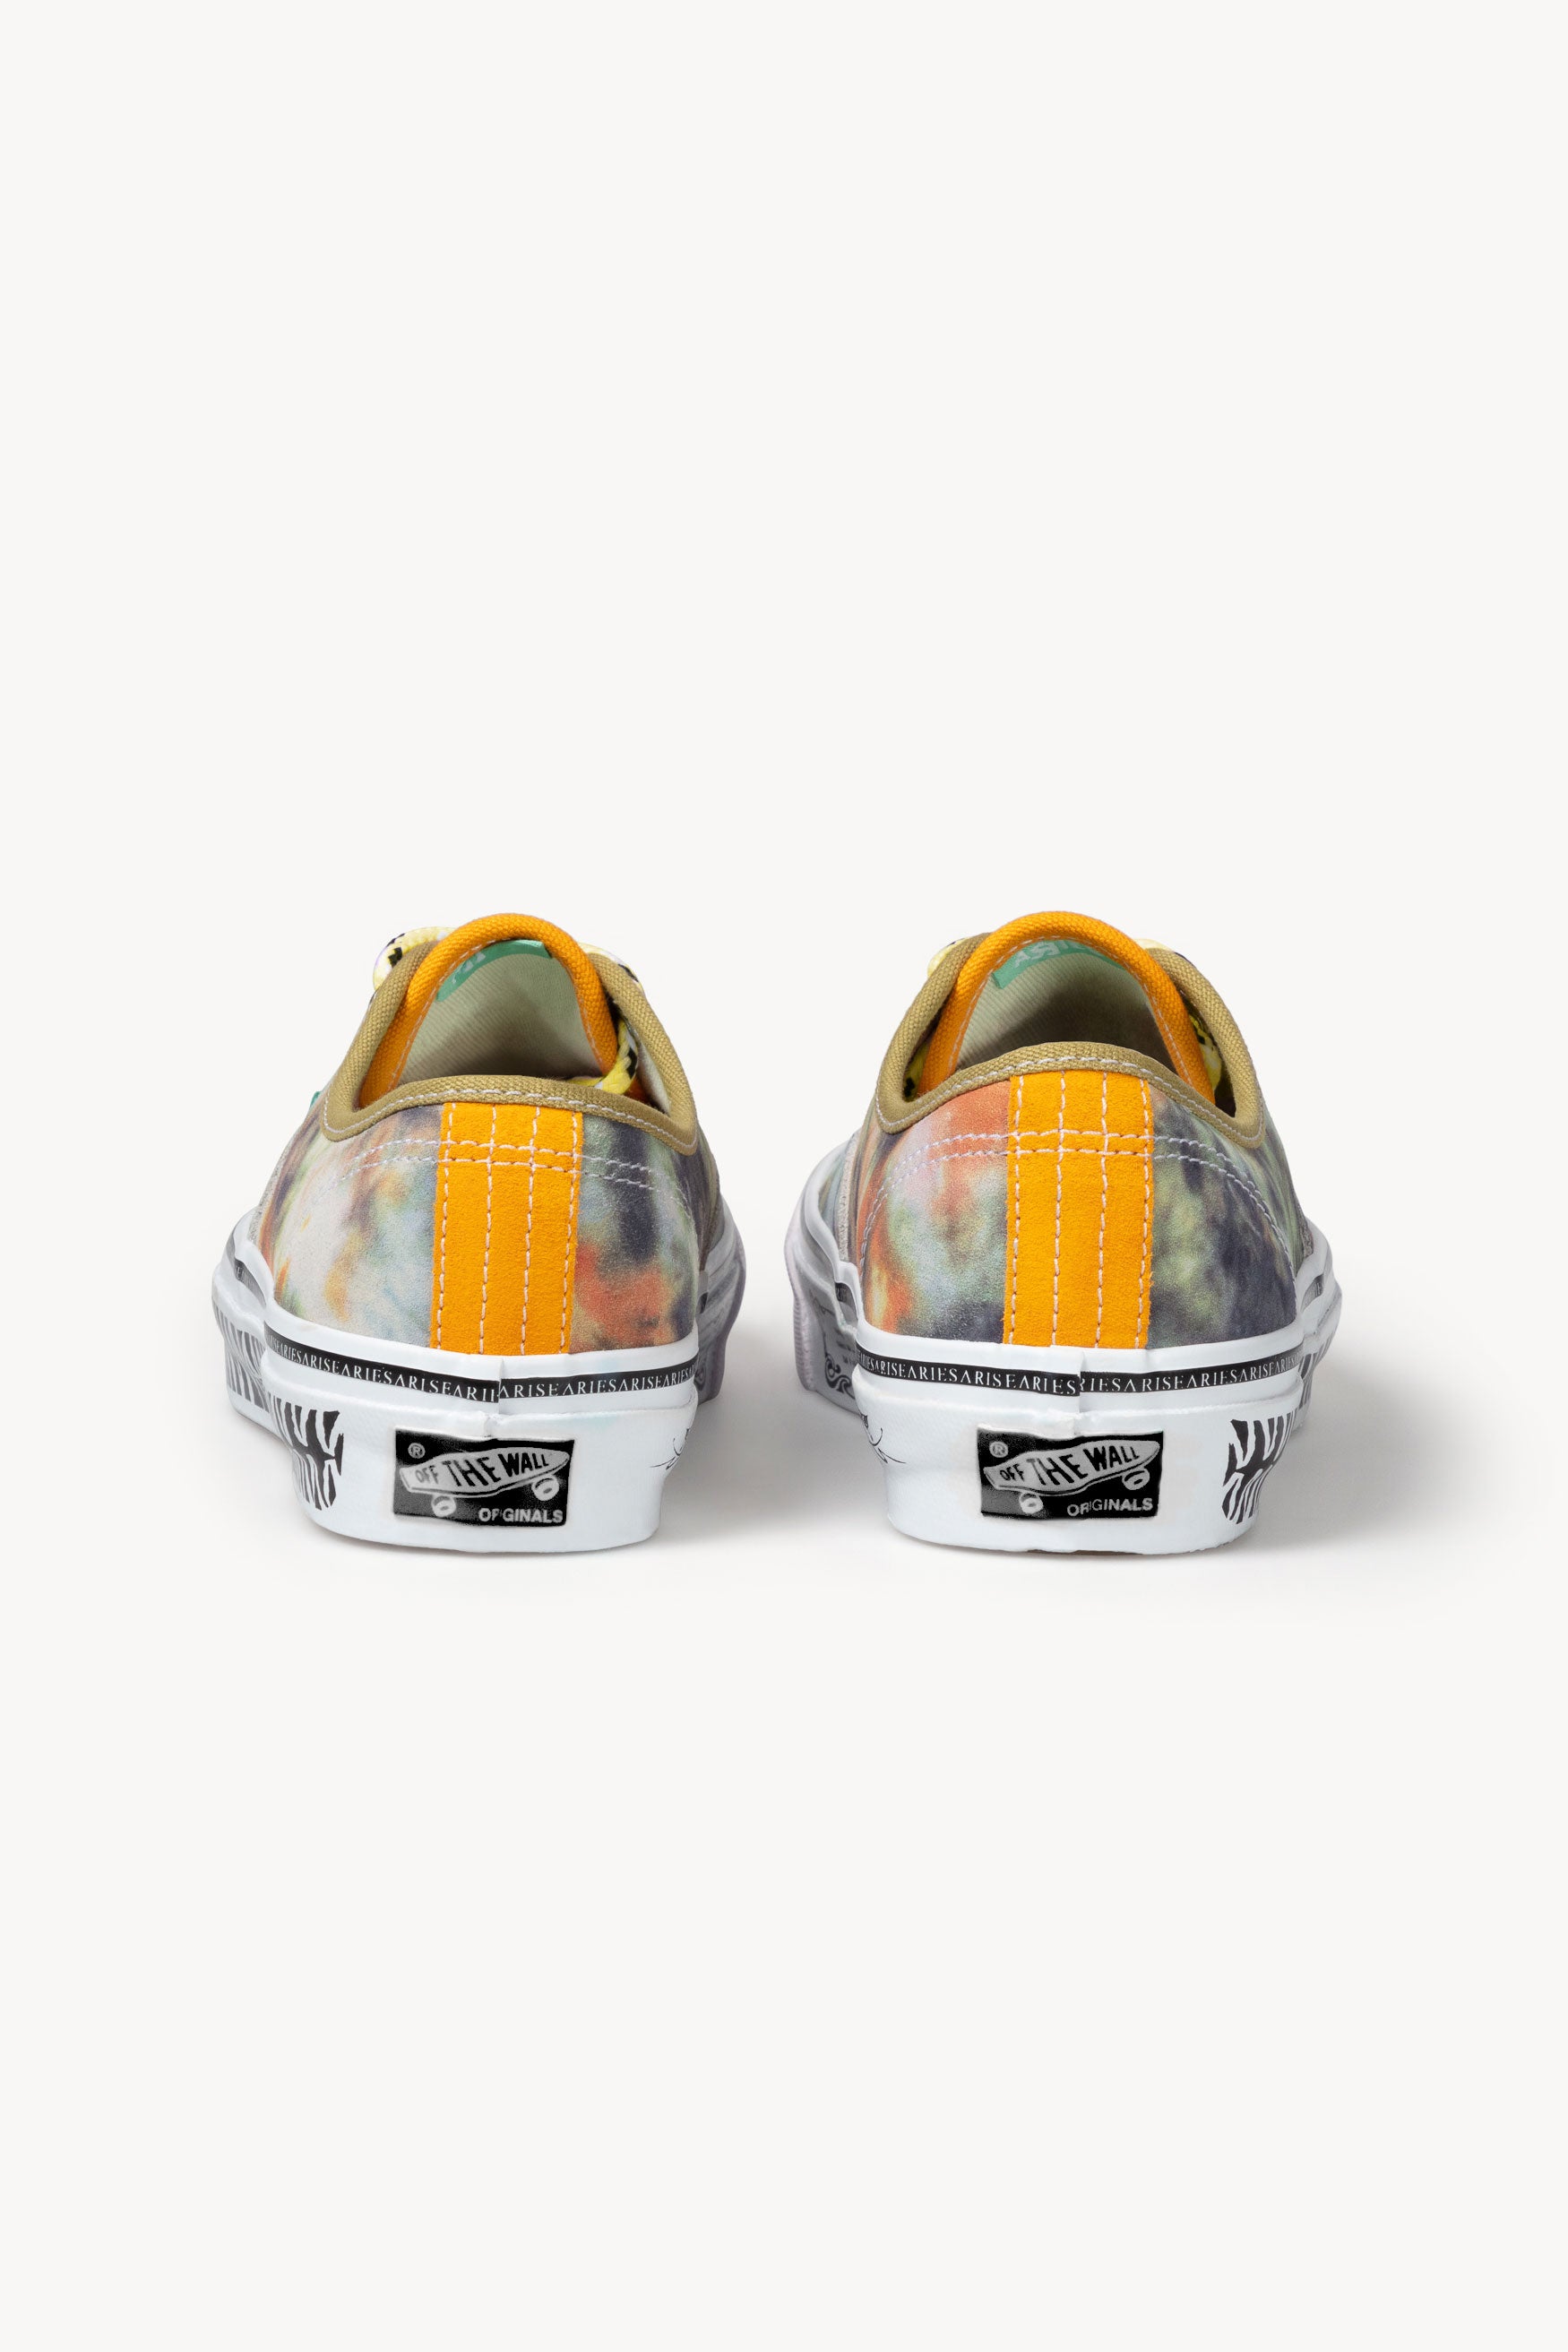 Load image into Gallery viewer, Aries x Vault by Vans Tie dye OG Authentic LX